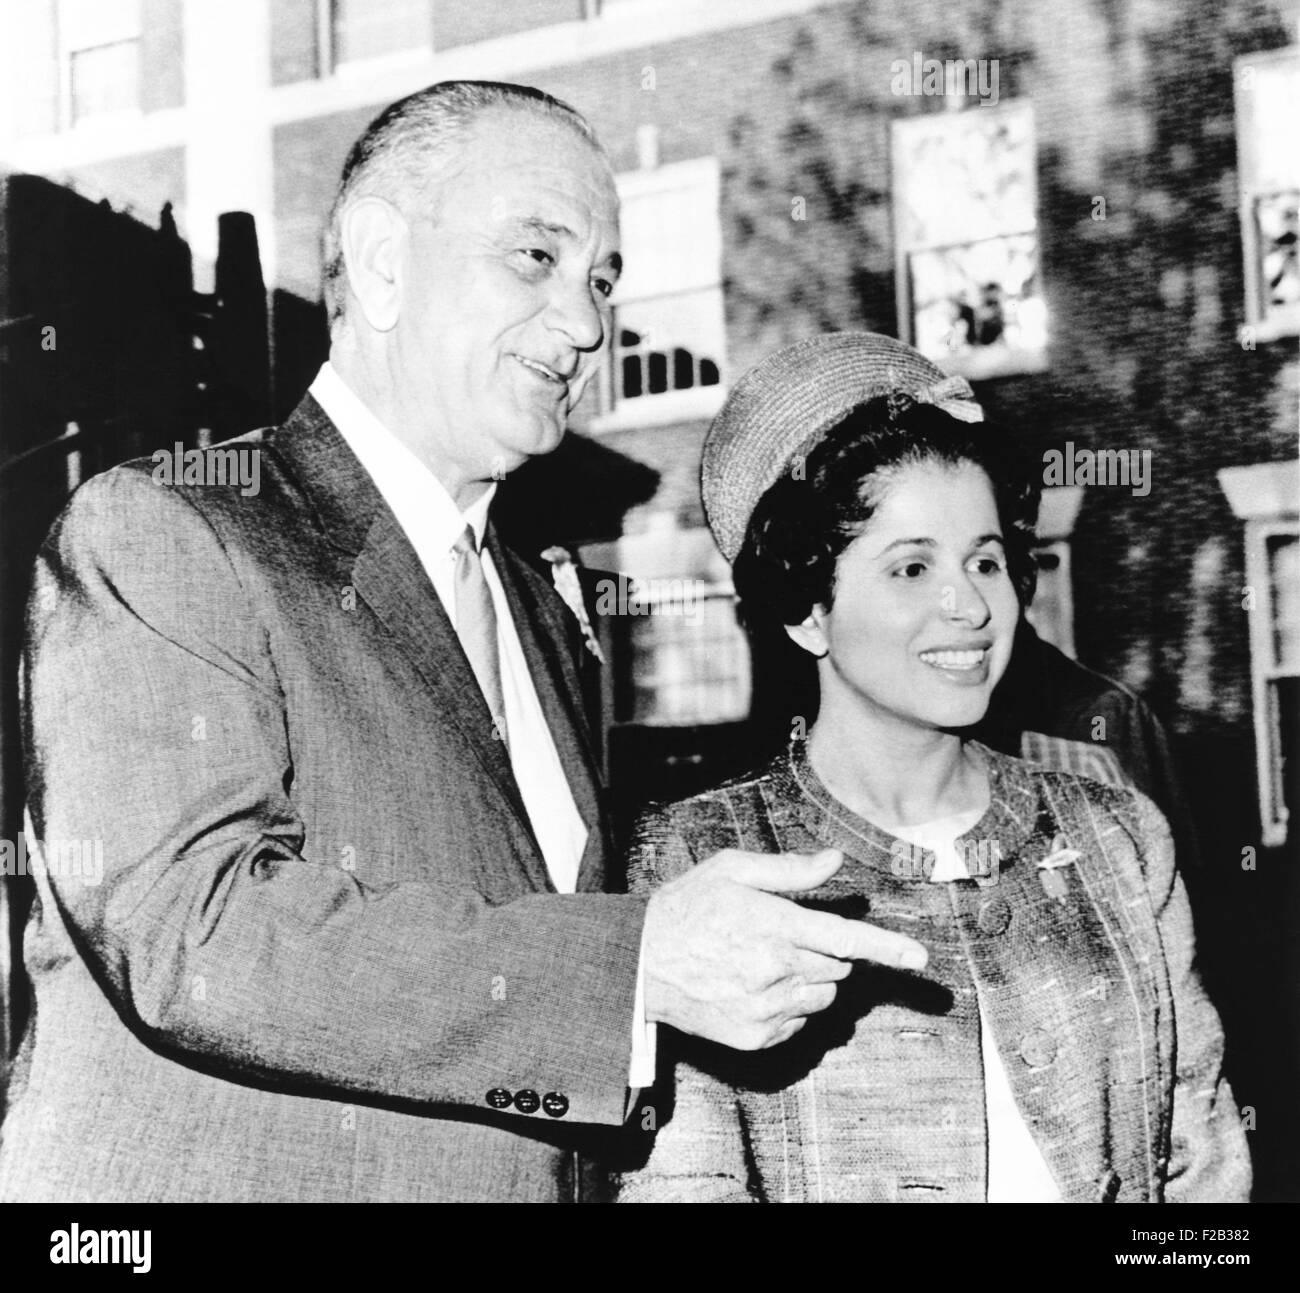 President Johnson chats with Patricia Harris, Professor of Constitutional Law at Howard University. Lyndon Johnson appointed her Ambassador to Luxembourg. She was the U.S.'s first African-American woman in the high diplomatic position. June 4, 1965. (CSU 2015 7 260) Stock Photo